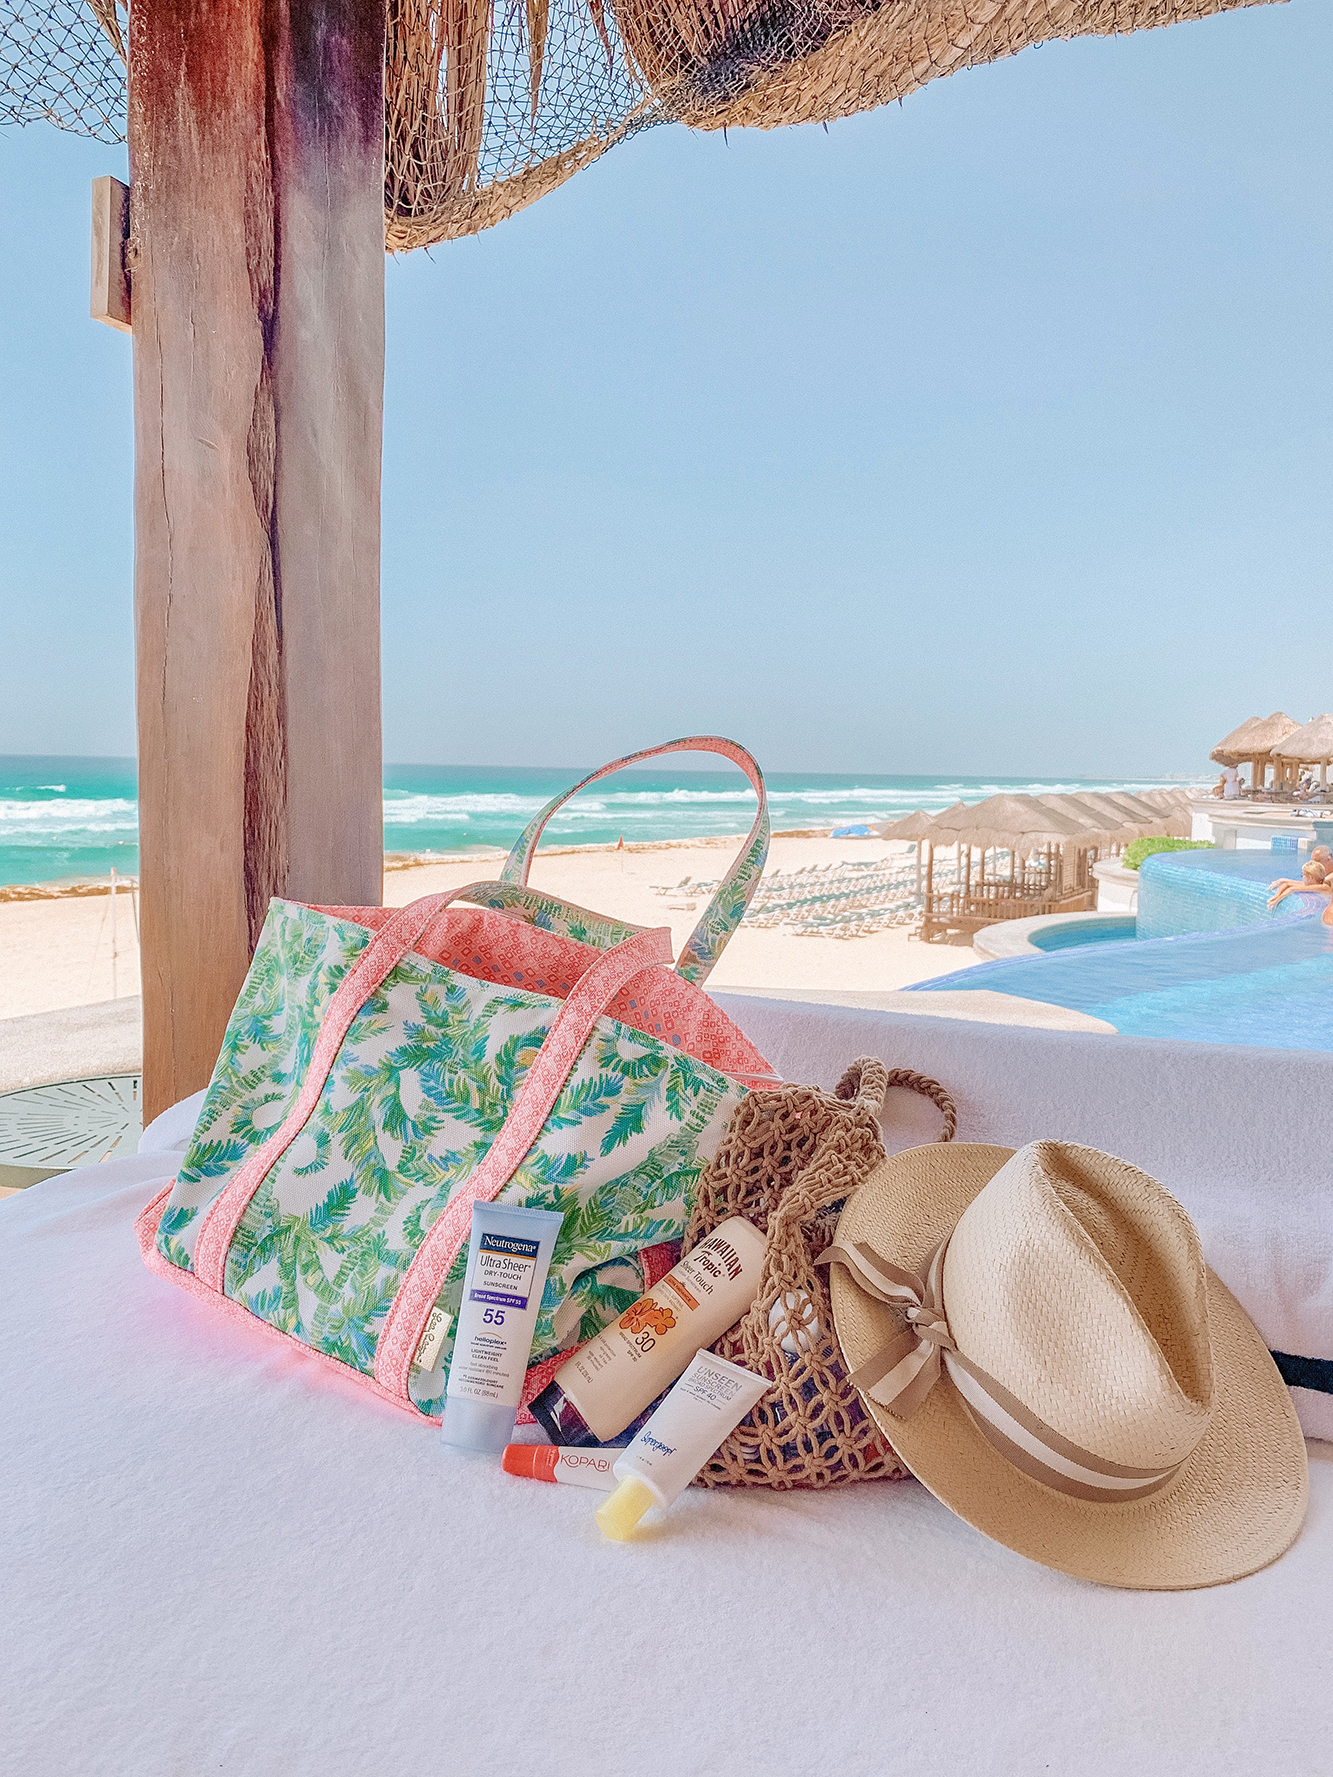 Cabana Day in Cancun Mexico | Travel Diary of my trip to the Yucatán Peninsula | Kristy Wicks